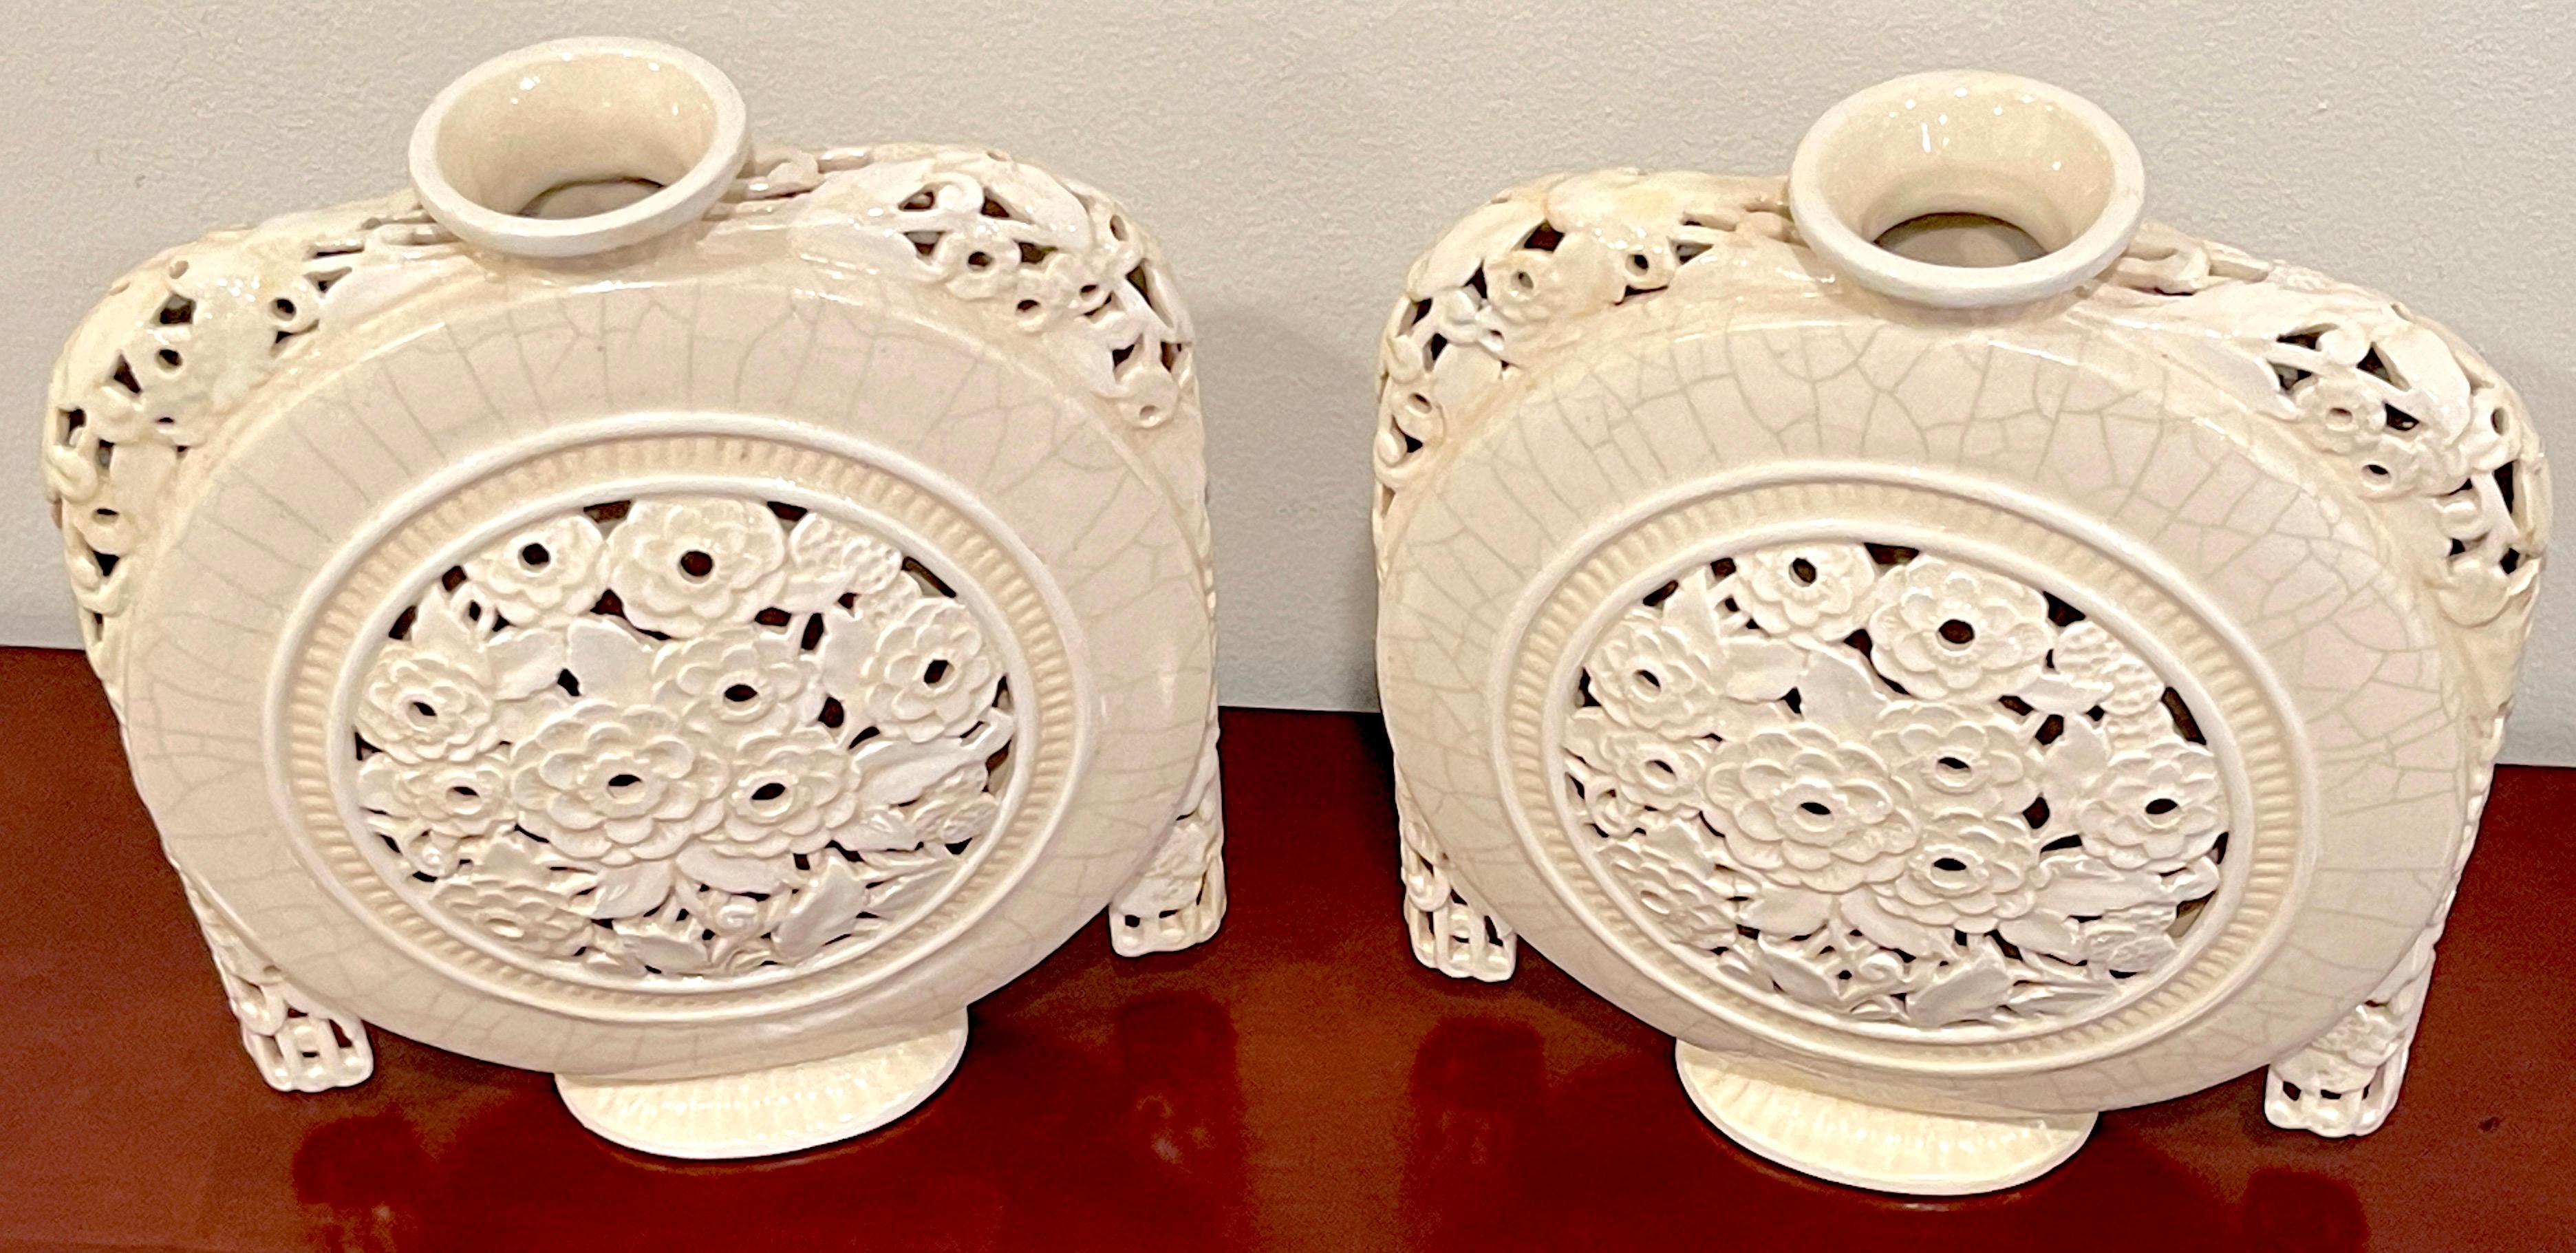 Pair of French Art Deco Pierced Moon Flask Vases by, Henri Chaumeil In Good Condition For Sale In West Palm Beach, FL